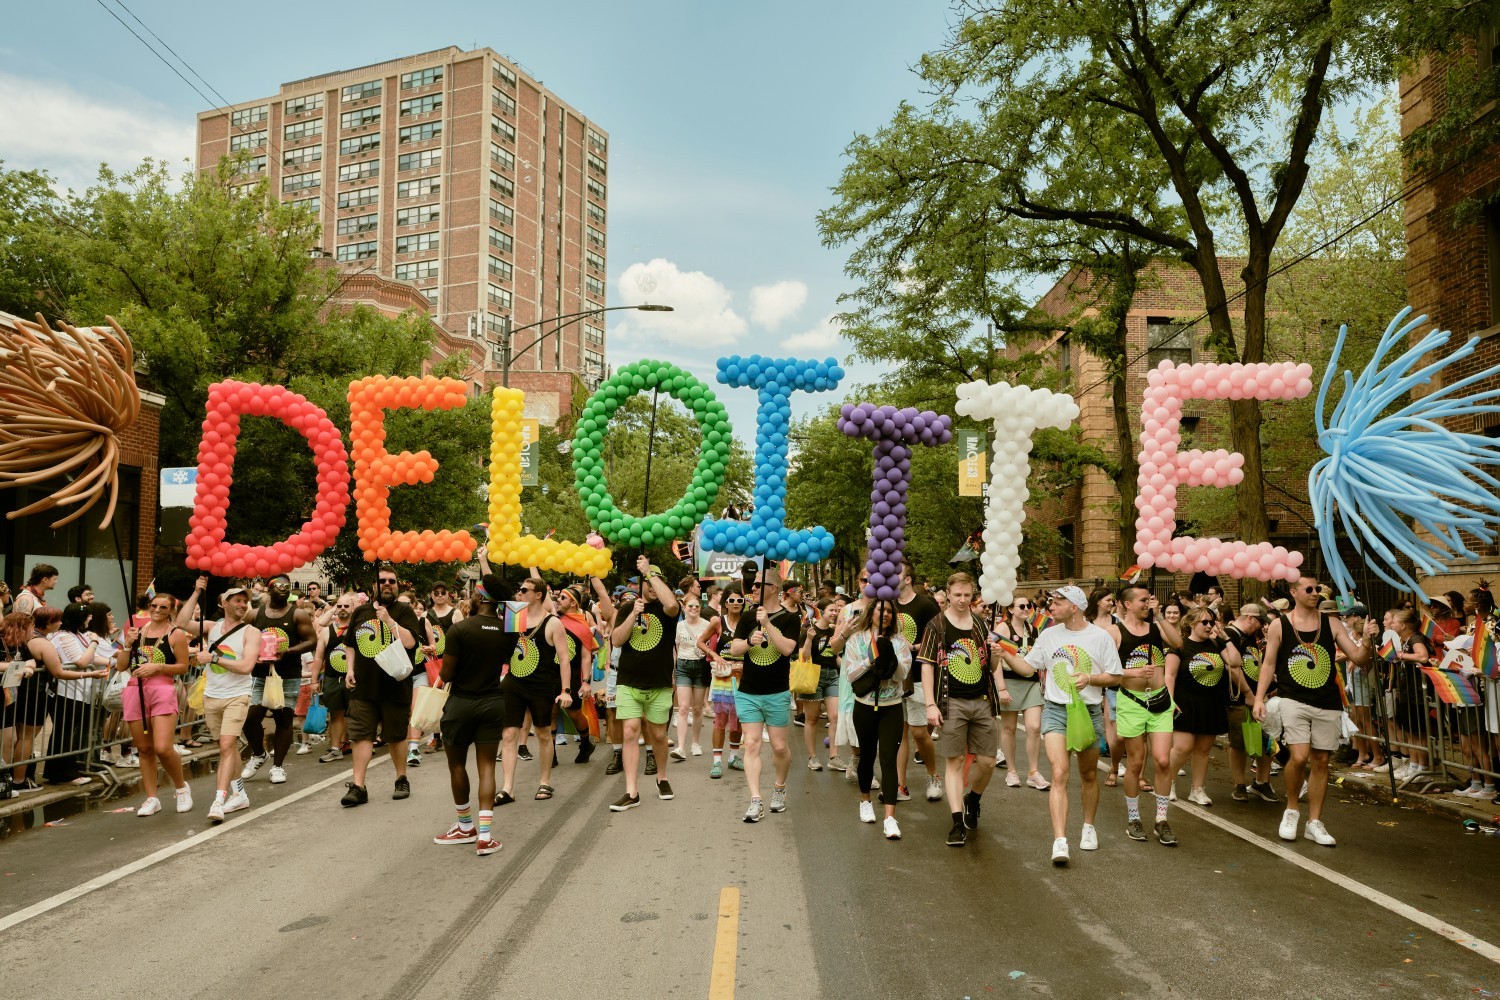 As a longstanding advocate for diverse communities, Deloitte demonstrates our allyship in a visible and impactful way. 